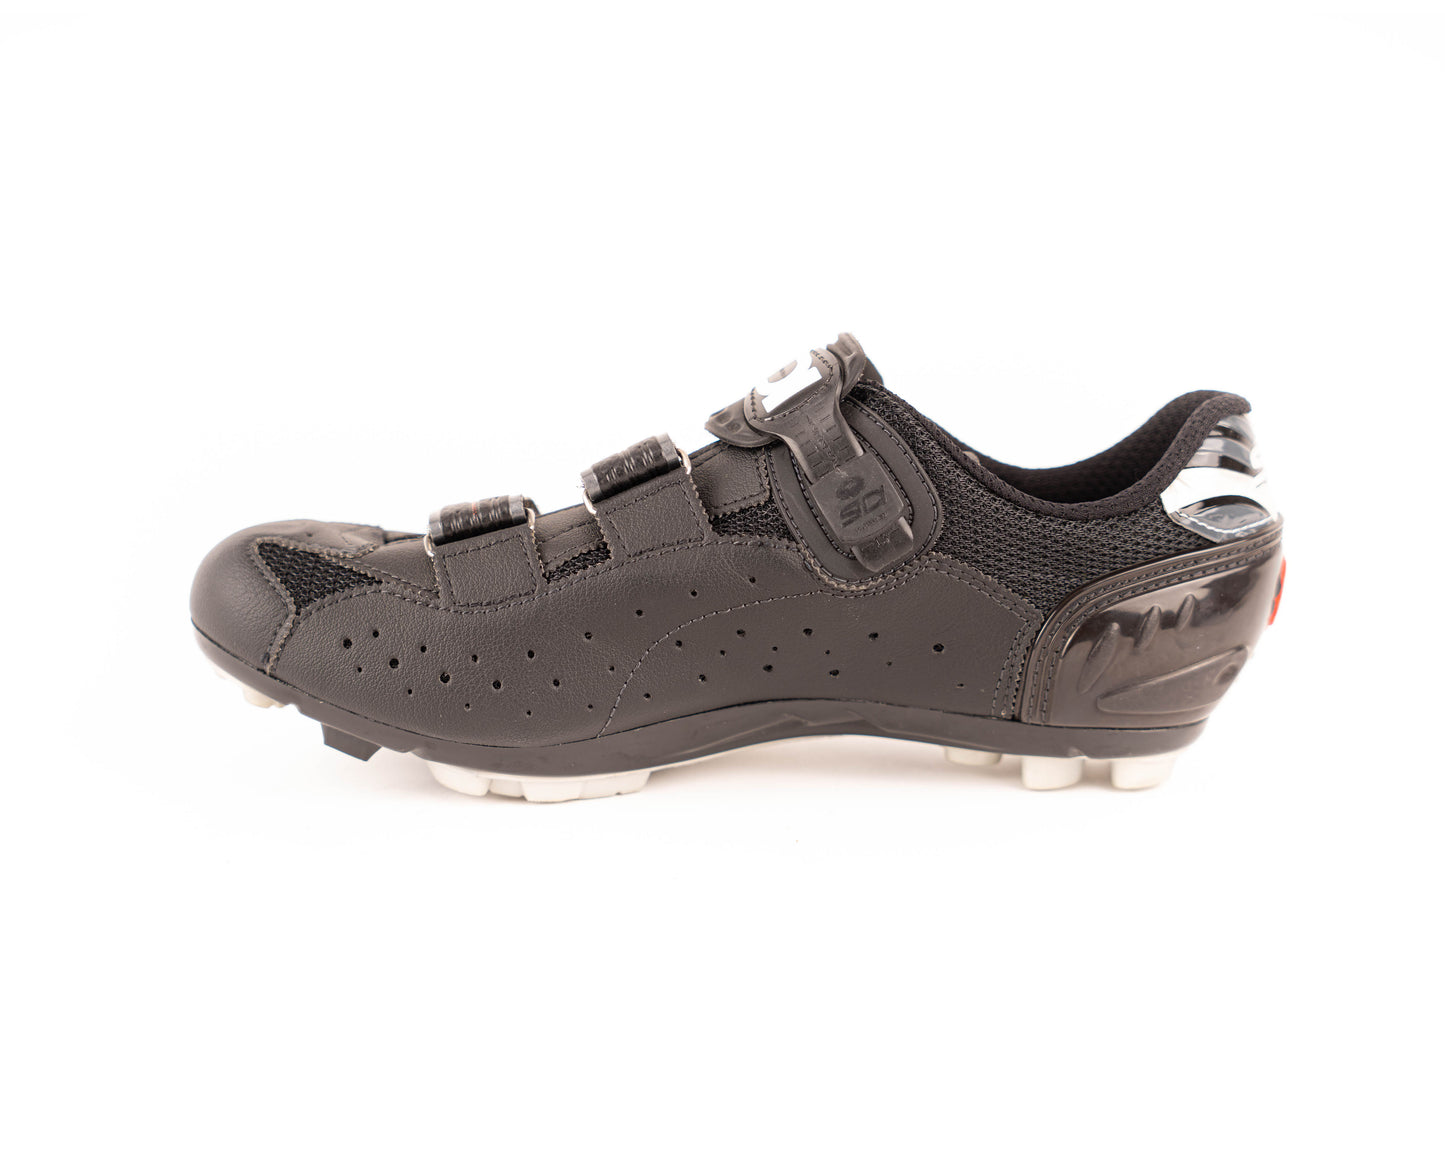 Sidi Dominator Fit Shoe Blk 44 RIGHT ONLY